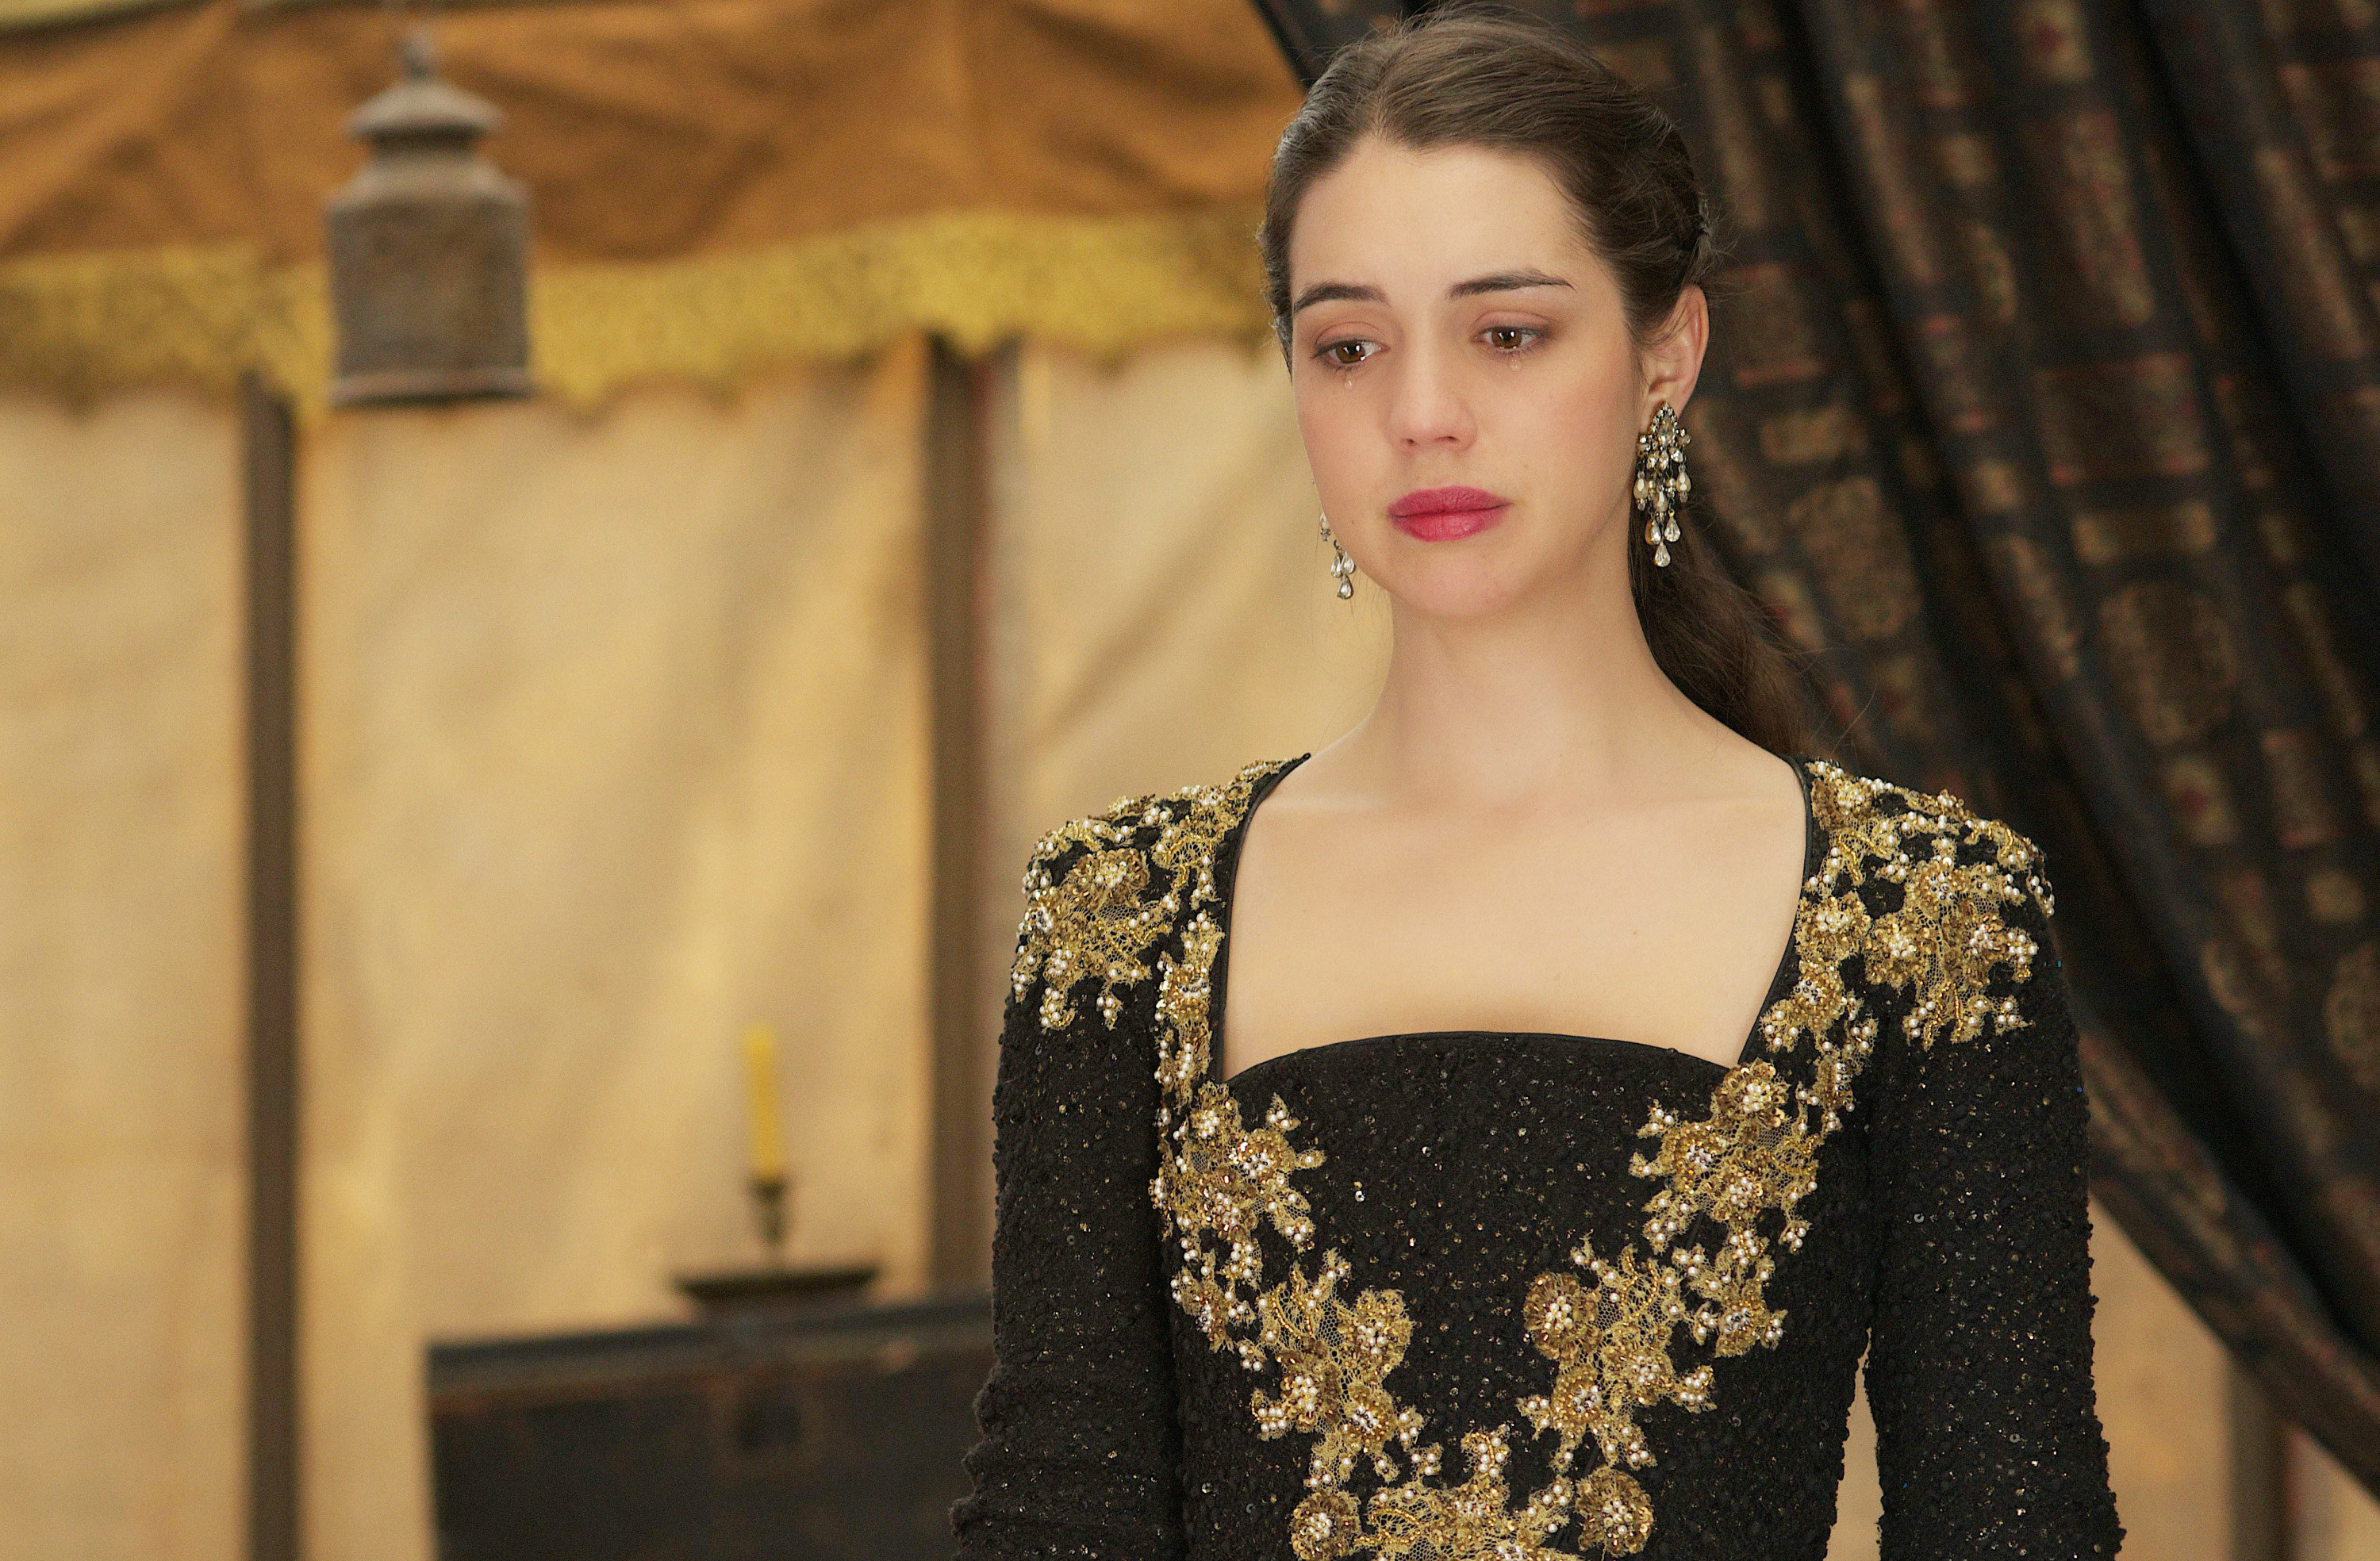 Adelaide as Mary in &quot;Reign&quot;